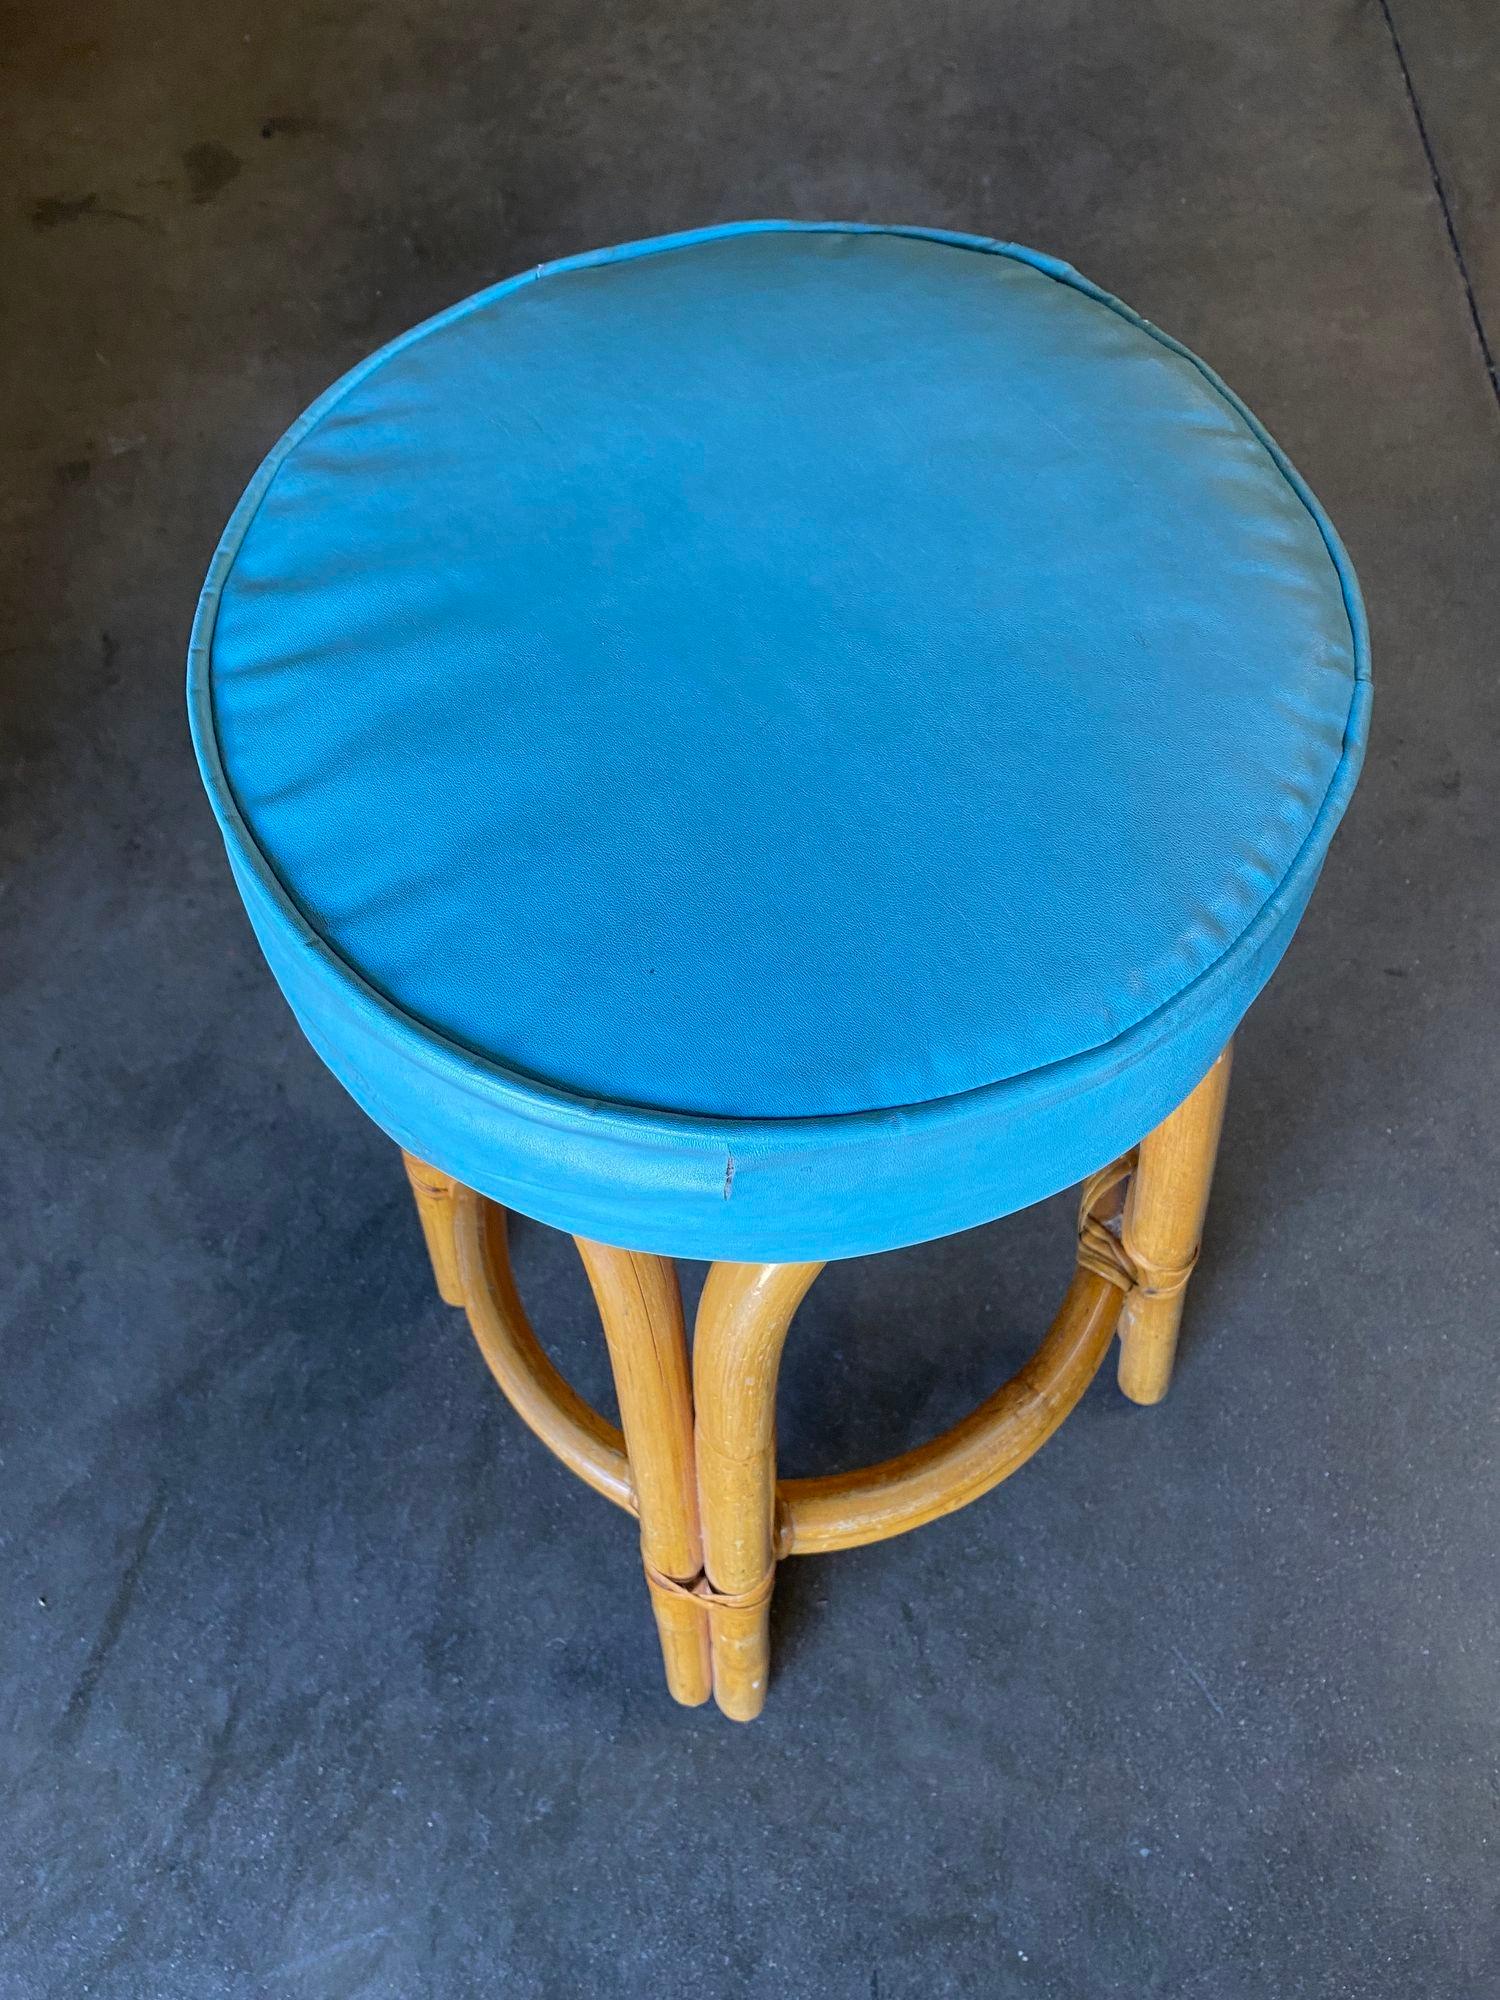 Restored Single Stand Arched Rattan Bar Stool w/ Teal Green Seat, Set of Four In Excellent Condition For Sale In Van Nuys, CA